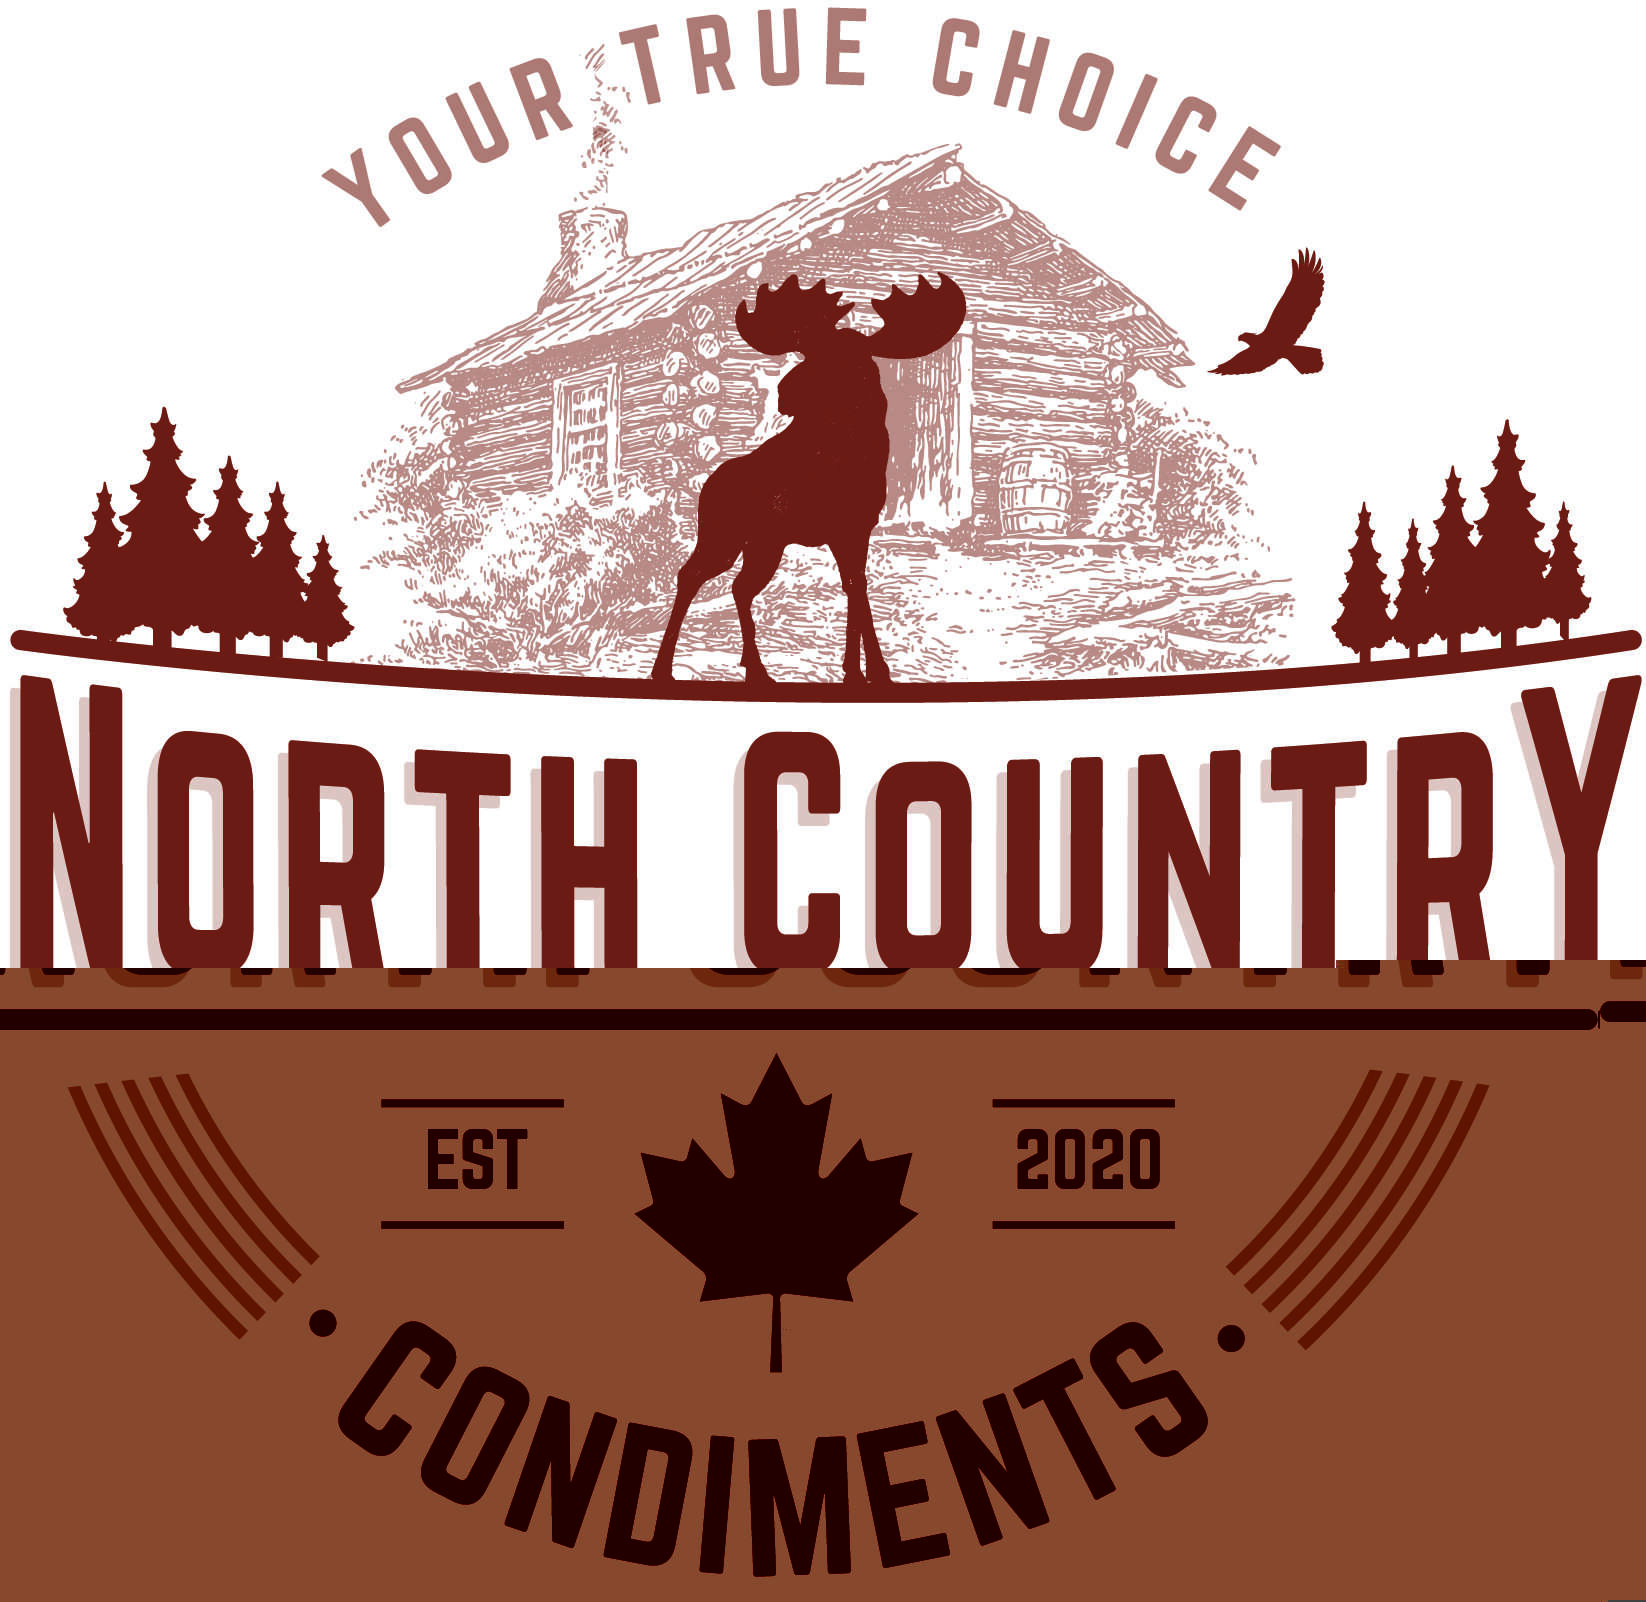 North Country Condiments